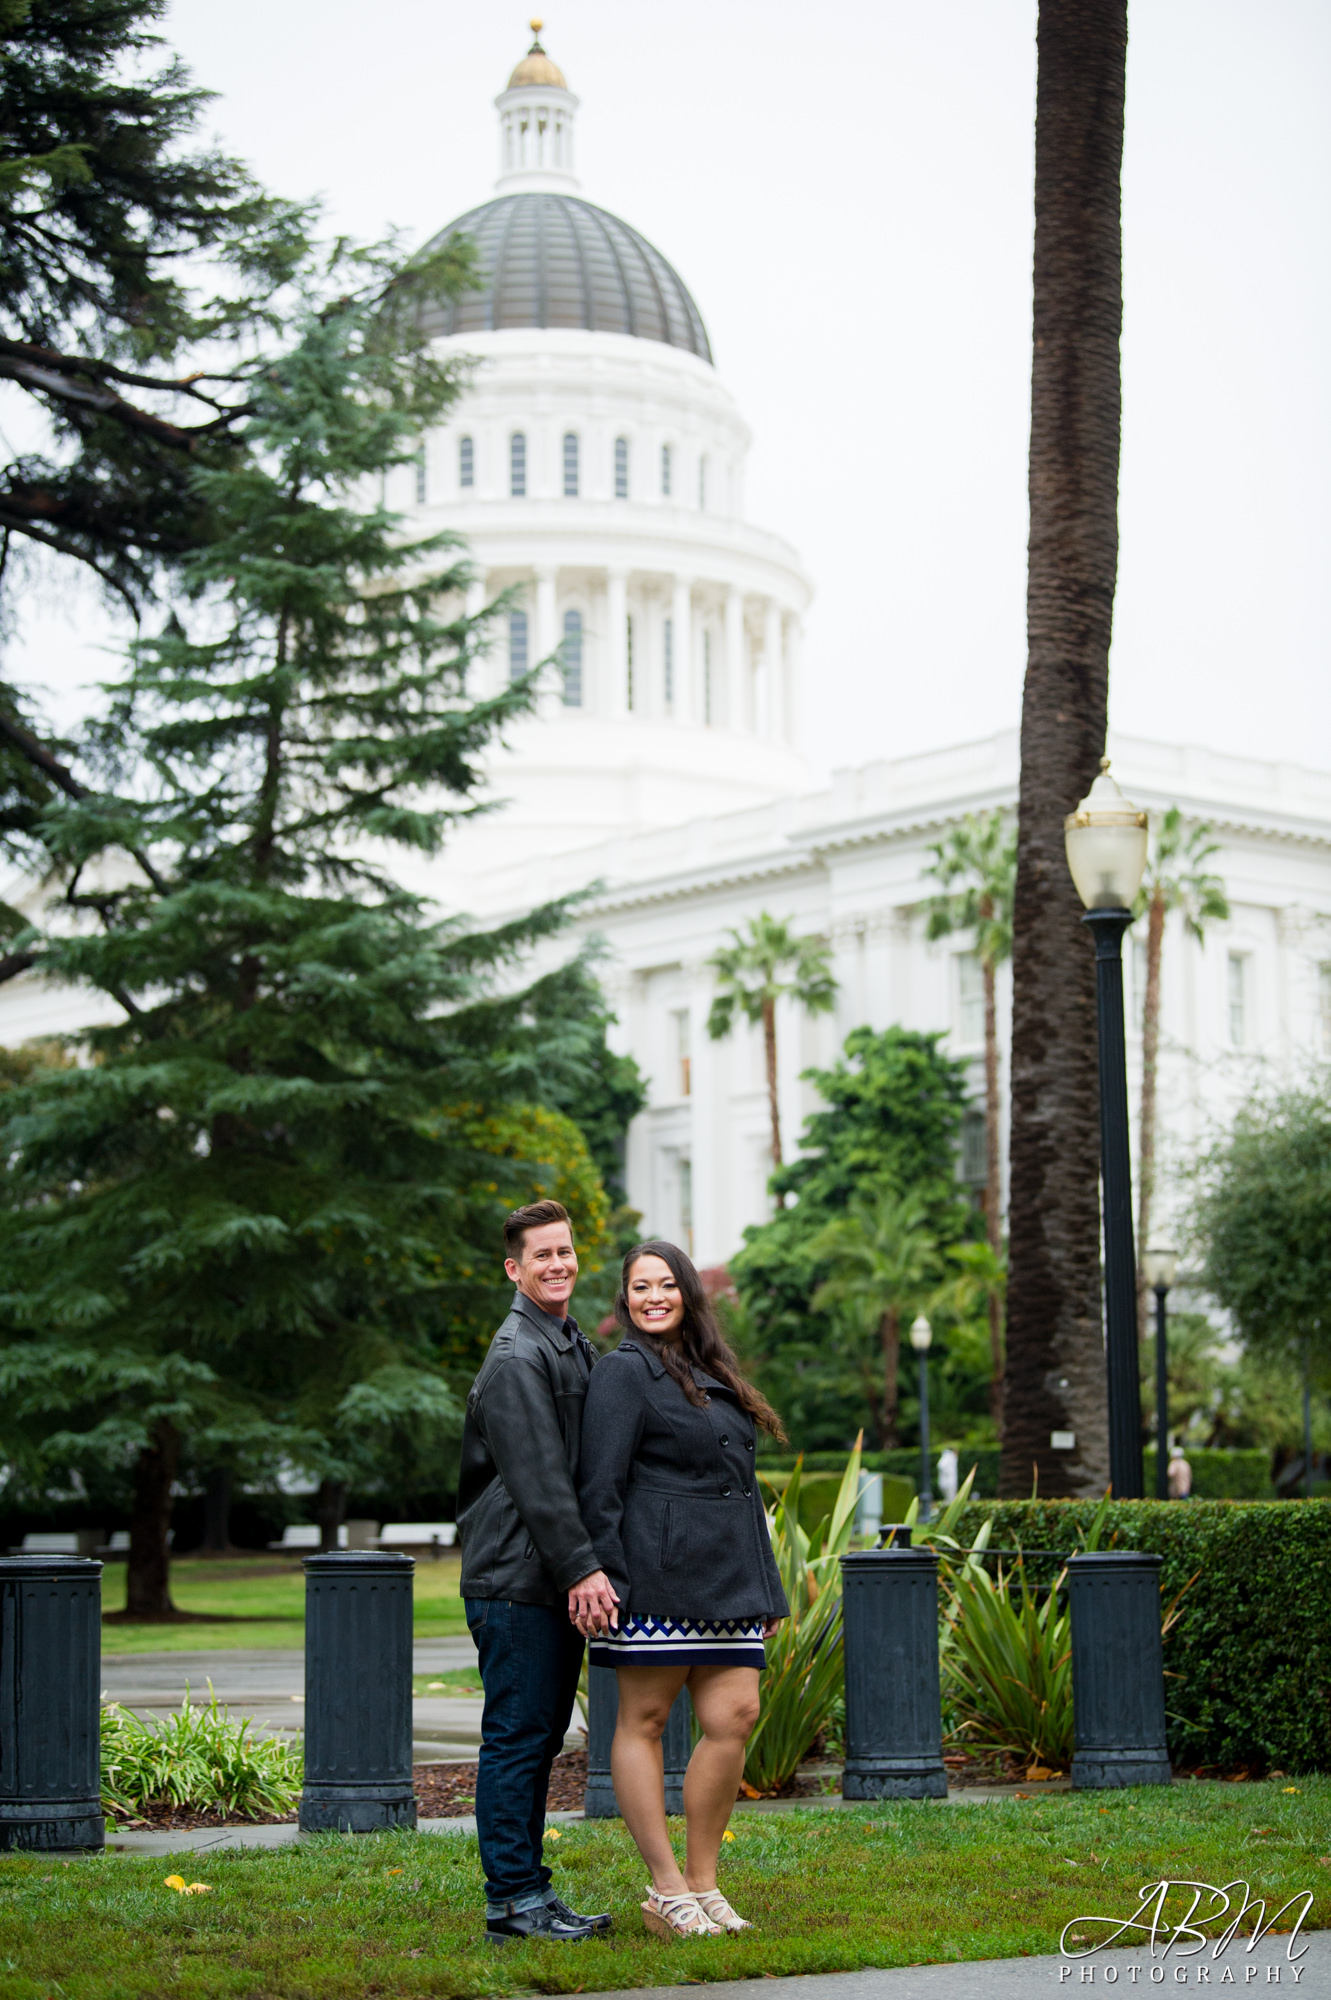 sacromento-fire-station-engagement-san-diego-wedding-photography-0002-1 Fire Station 5 | State Capital | Sacramento | Chalyn + Jen’s Engagement Photography